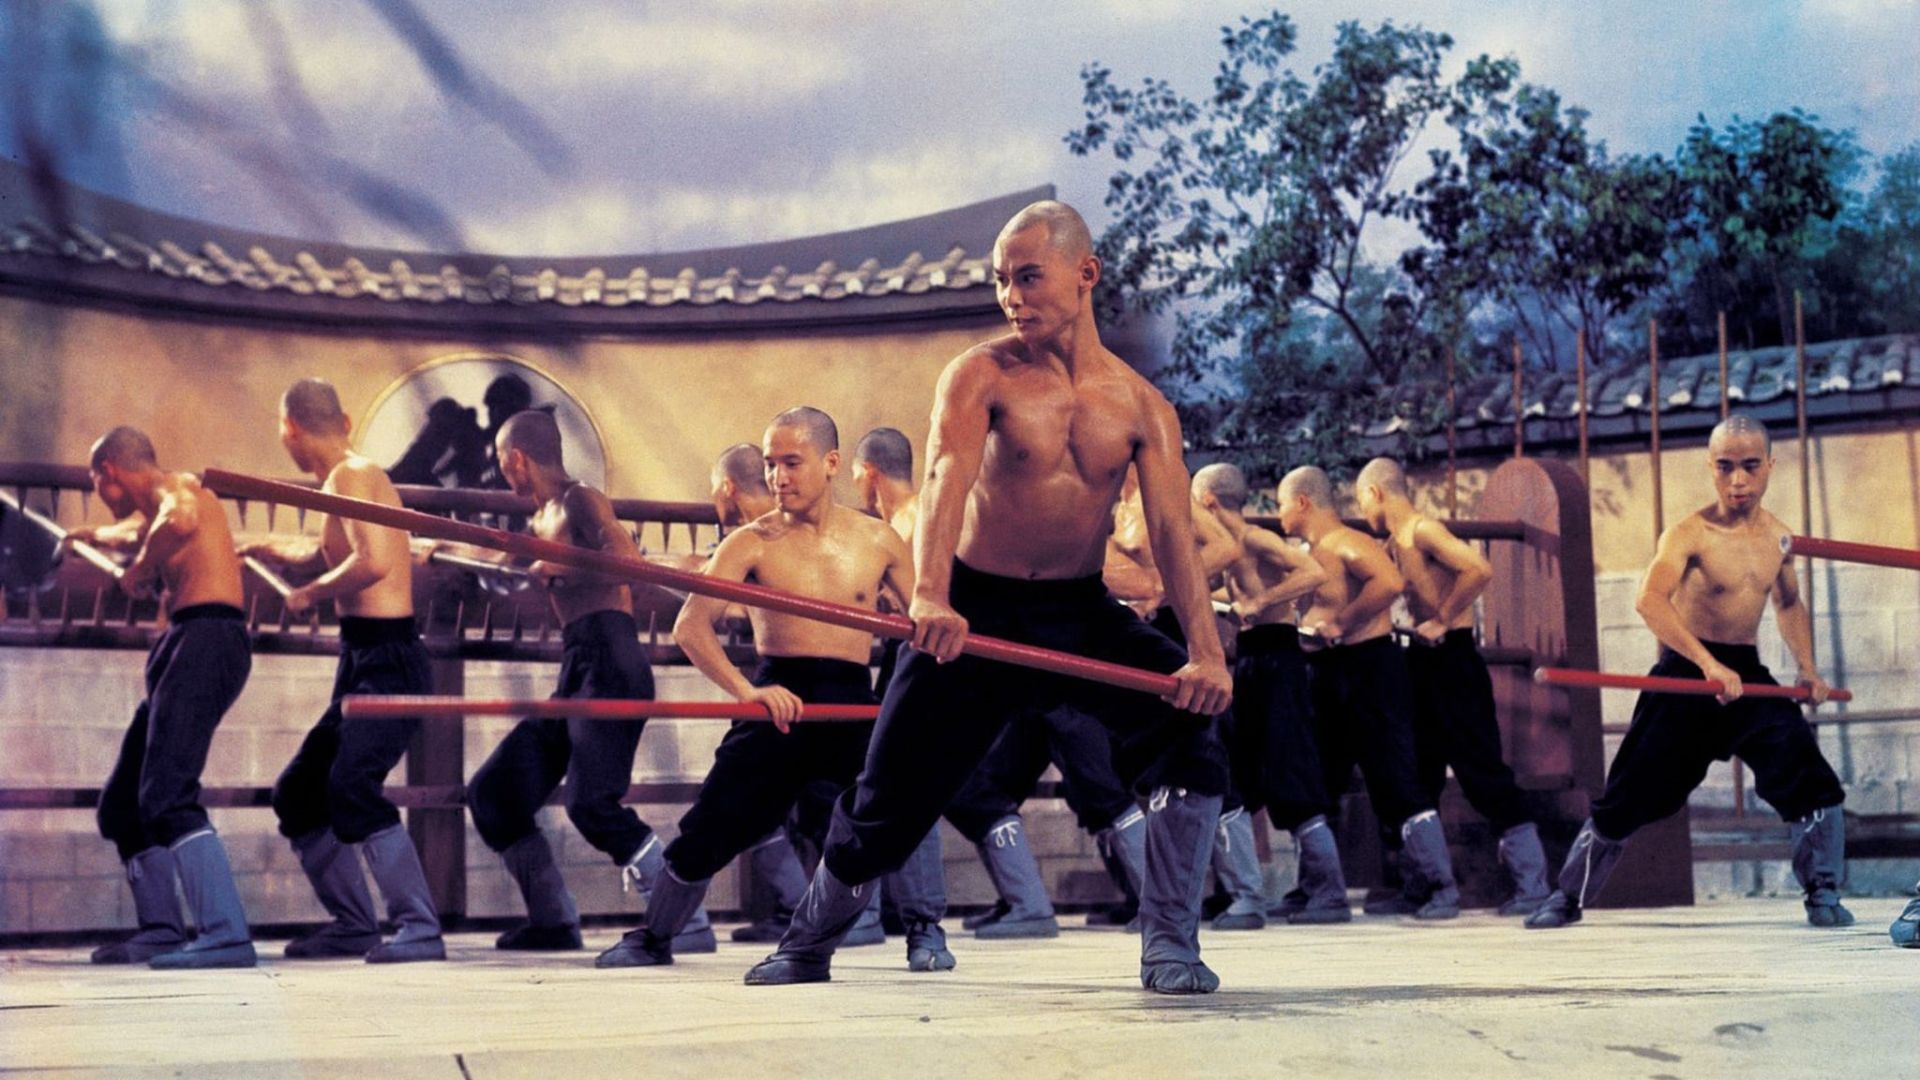 The 36th Chamber of Shaolin background